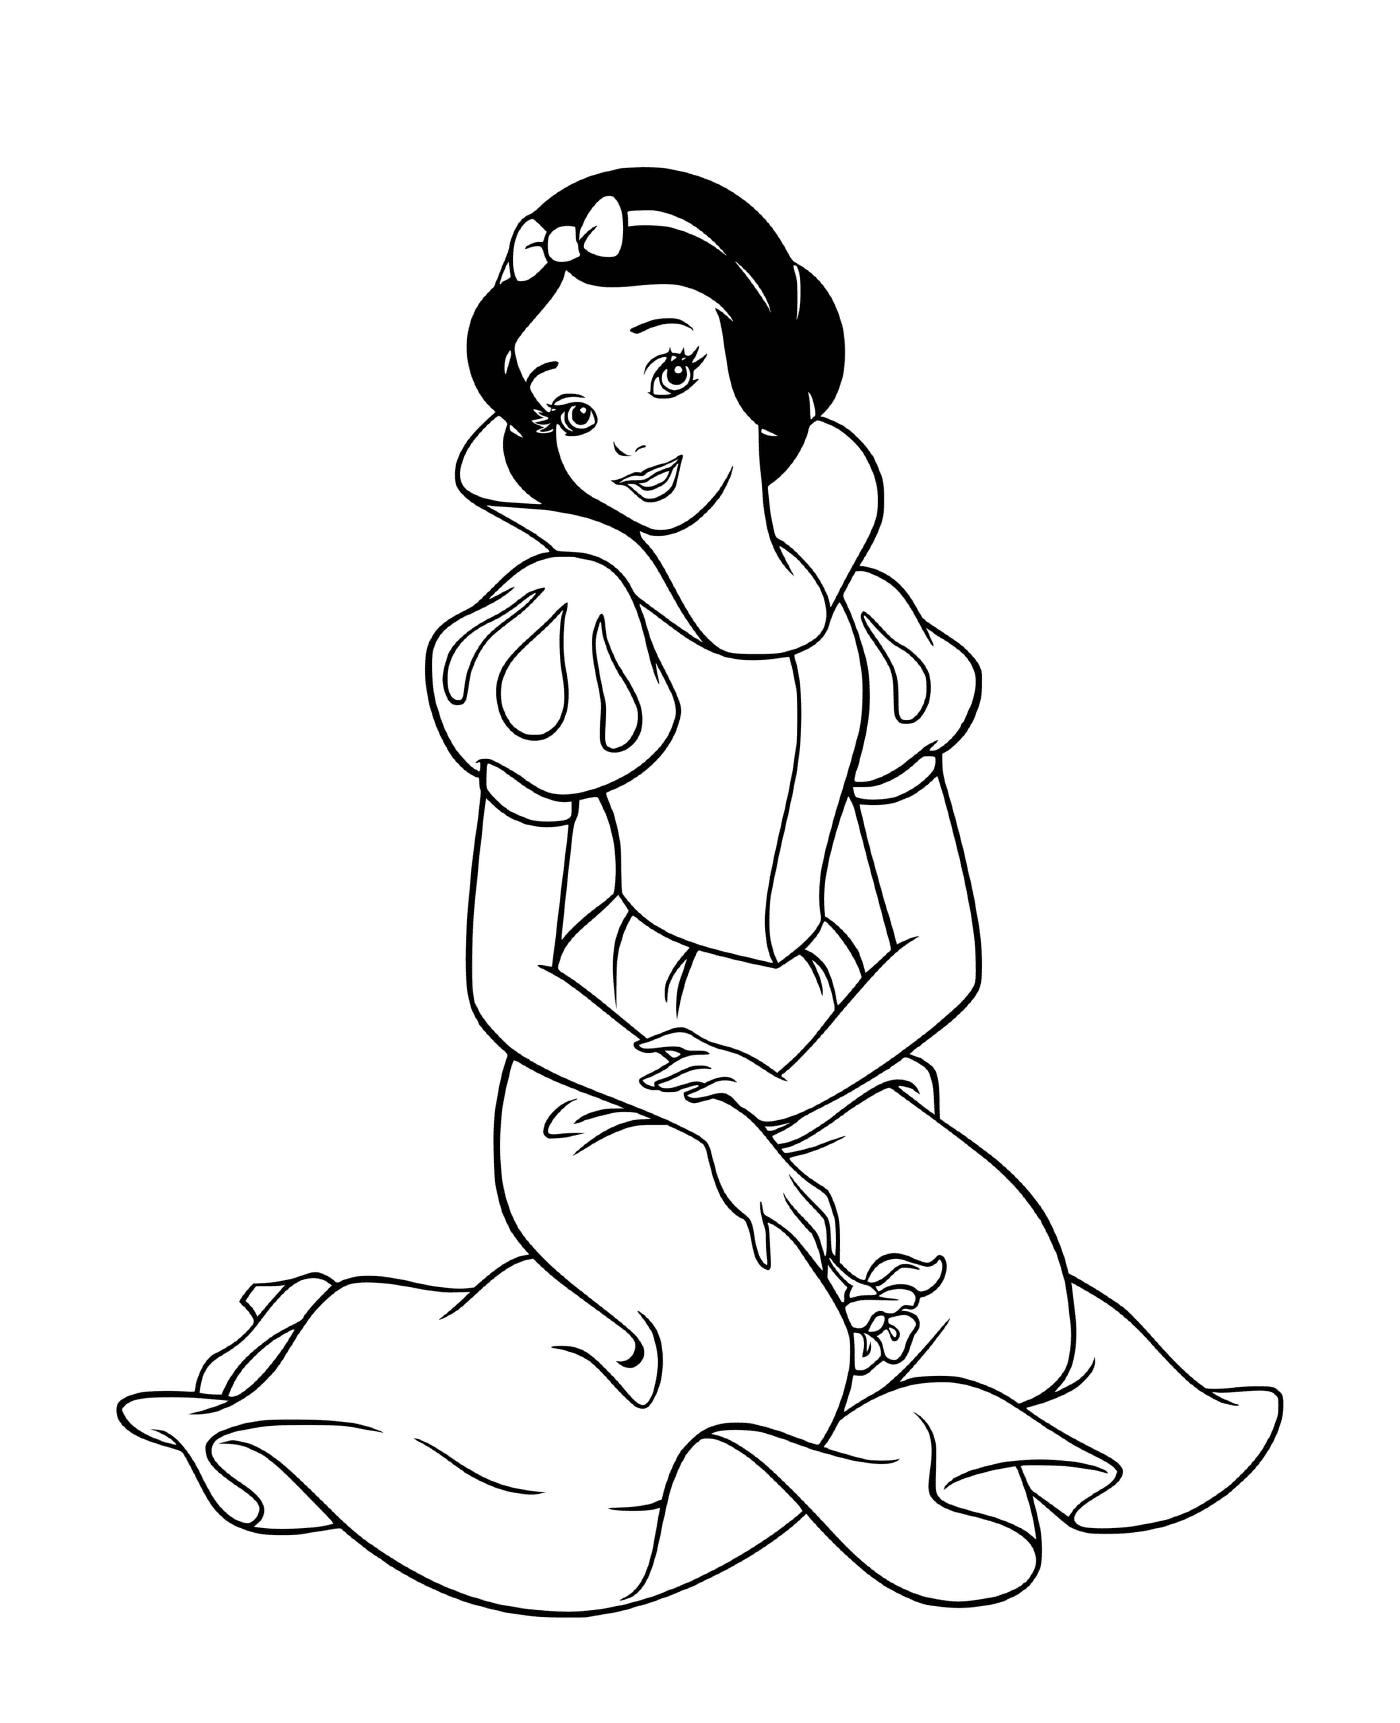  Snow White of the traditional tale of the Grimm brothers 